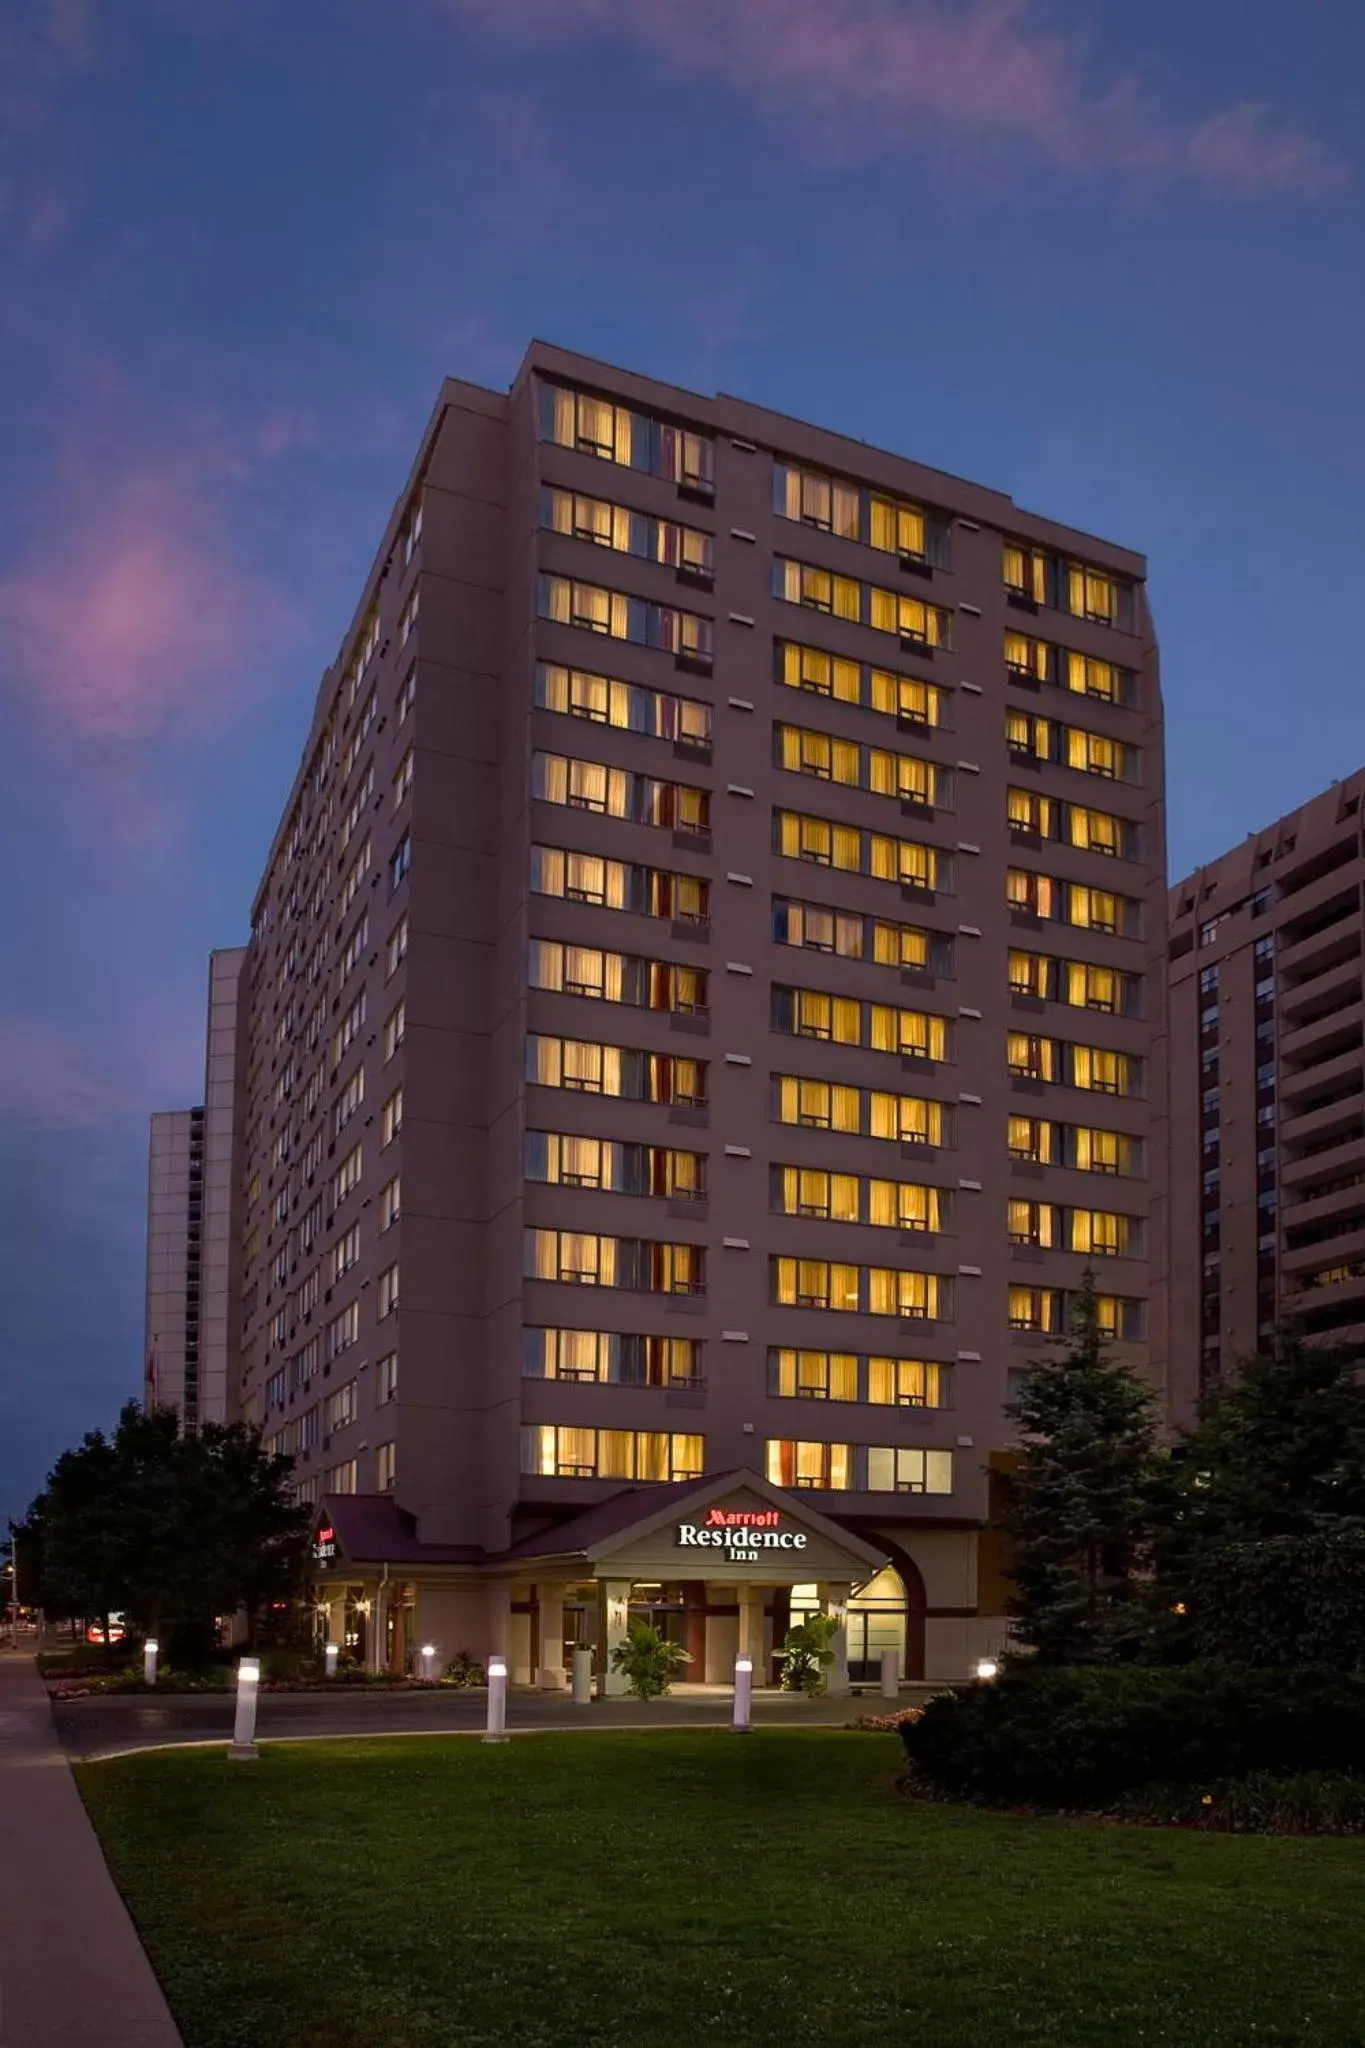 Property Building in Residence Inn by Marriott London Downtown